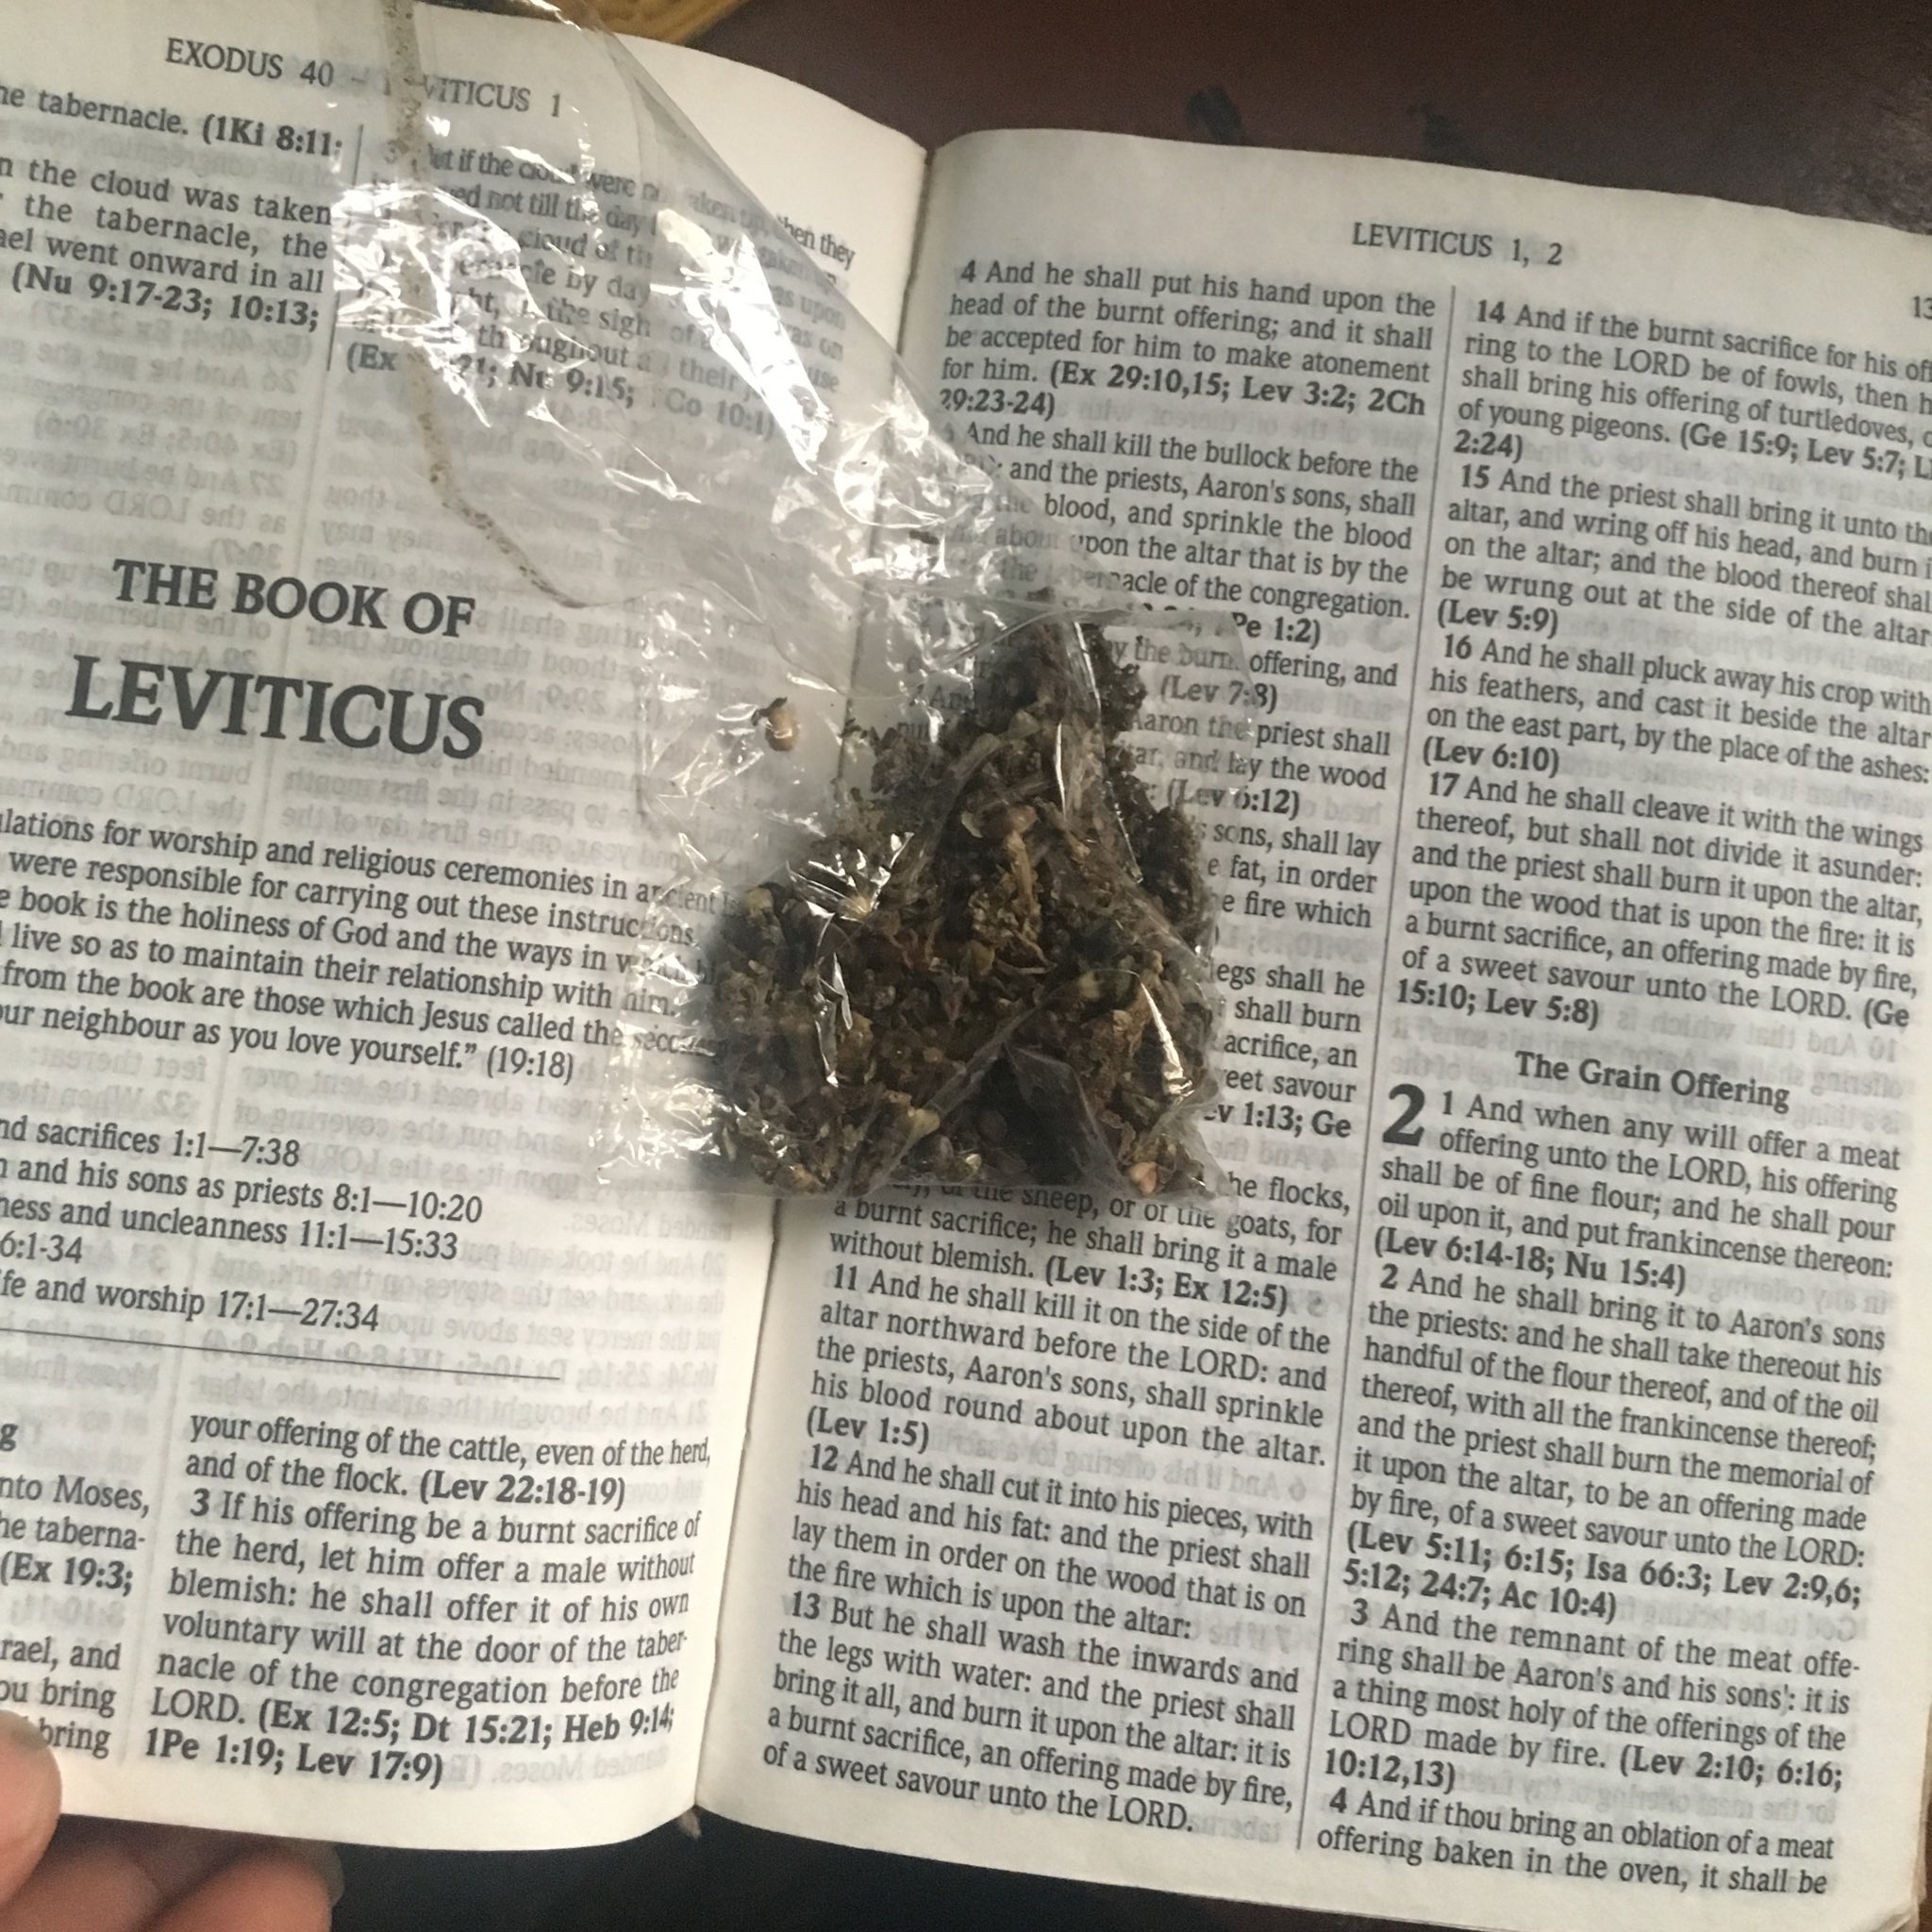 Woman Smokes Weed with Bible Sheet that talks about Women's Submission